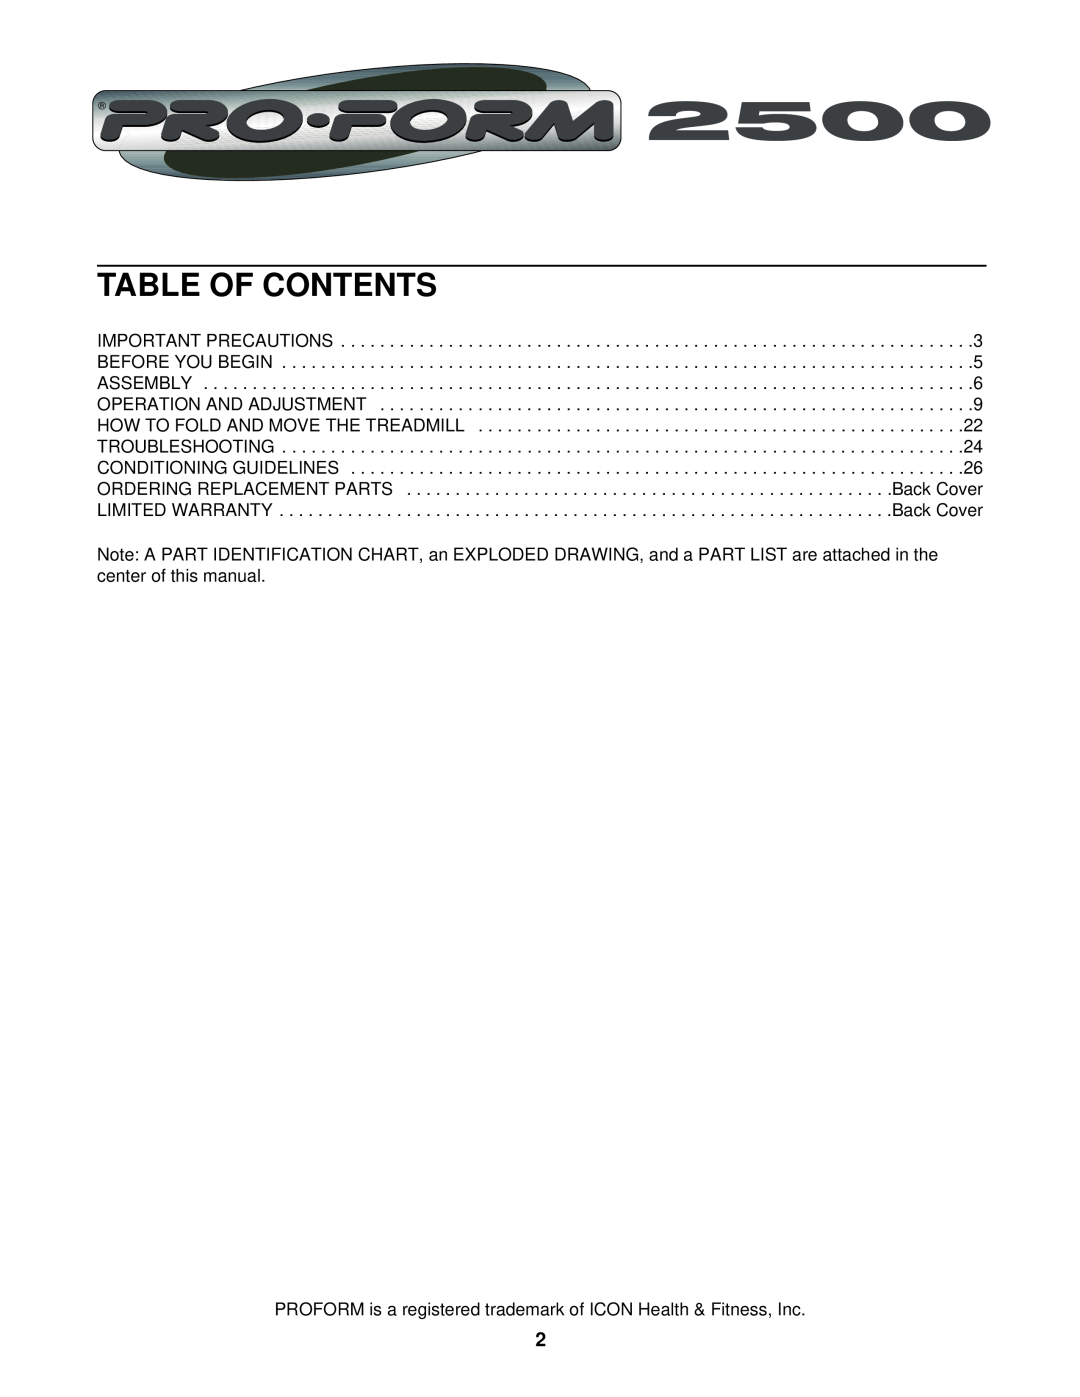 ProForm PFTL49721 user manual Table Of Contents, PROFORM is a registered trademark of ICON Health & Fitness, Inc 